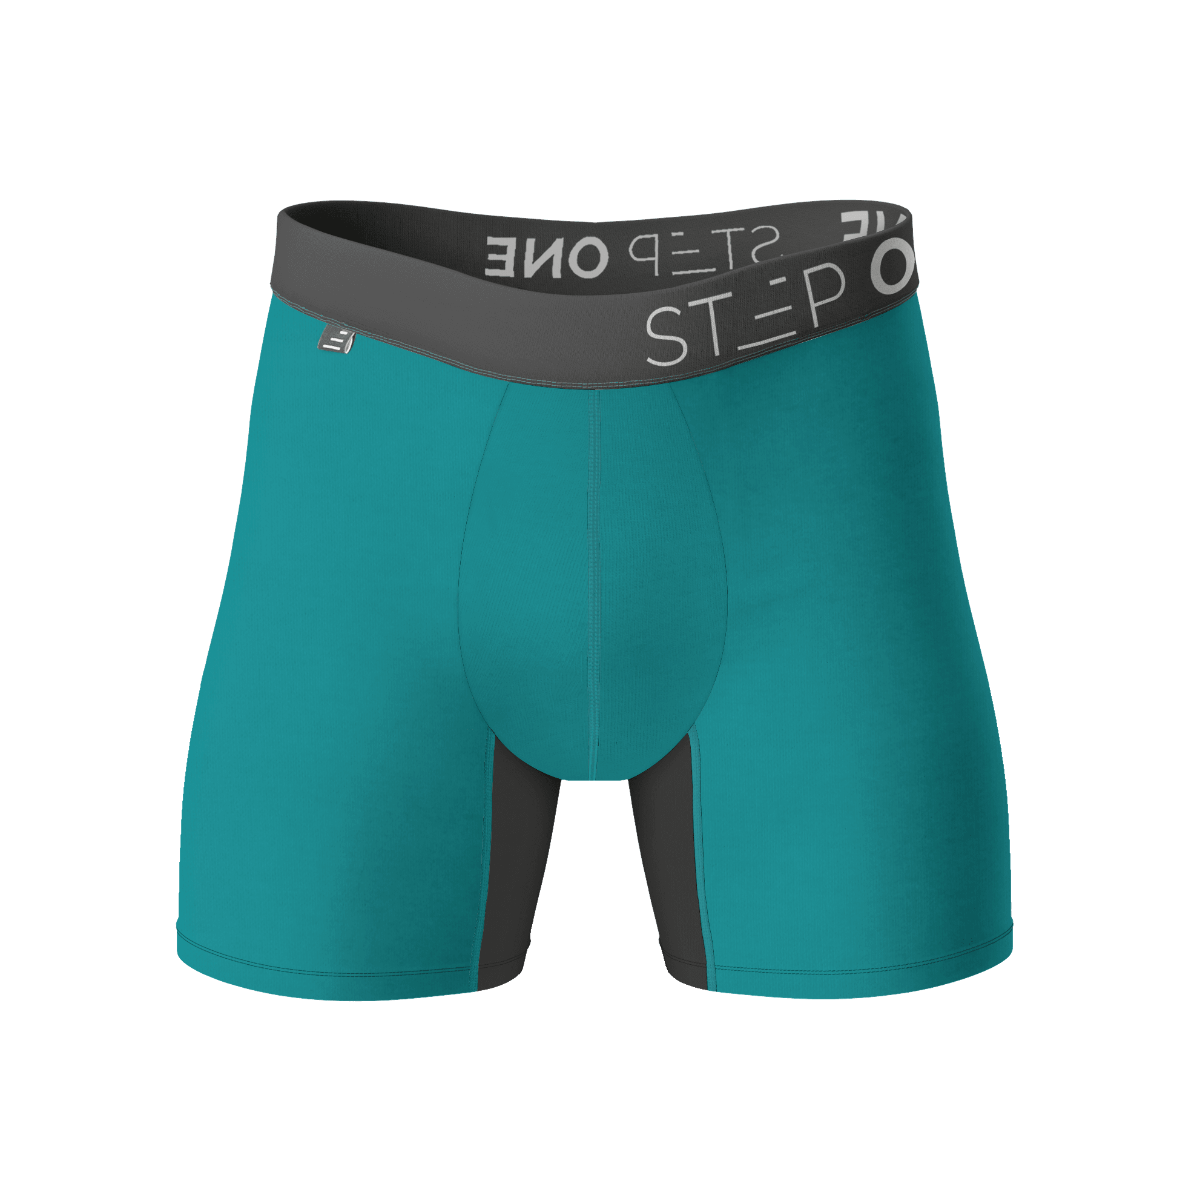 Men and Underwear on X: Among many new styles we brought in from